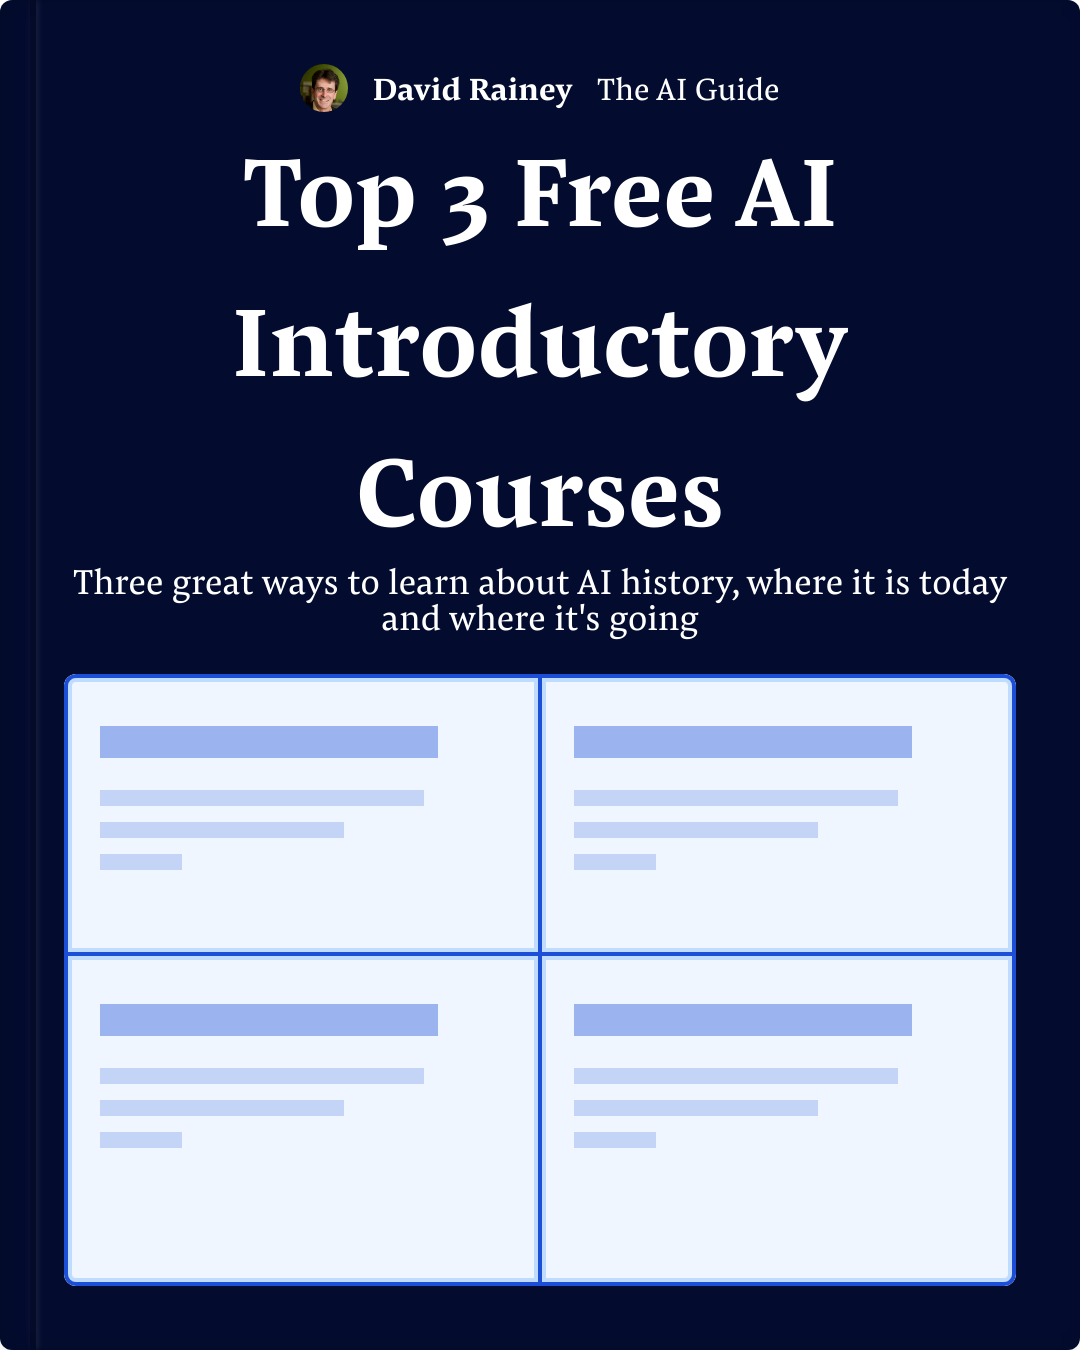 Top 3 Free AI Introductory Courses-cover (2)